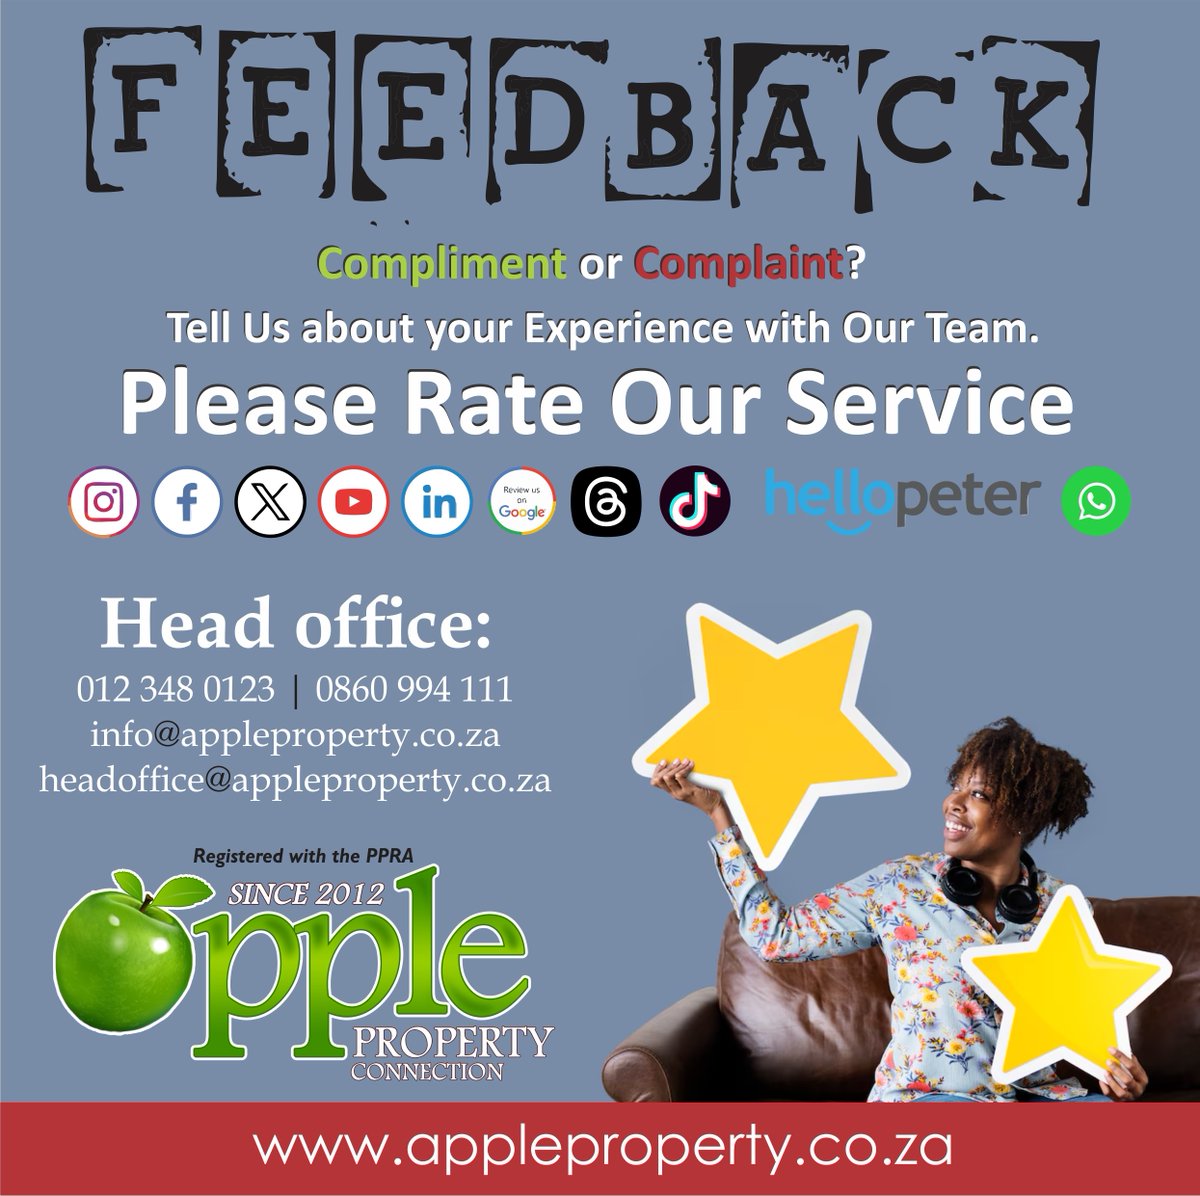 DID WE STAND OUT FROM THE CROWD? RATE OUR SERVICE!
Good or bad we want your feedback!

#ClientTestimonial
#hellopeter #LinkedIn #x #threads #Instagram #googlereviews #facebookreviews #ServiceFeedback #talktous #ApplePropertyConnection
appleproperty.co.za